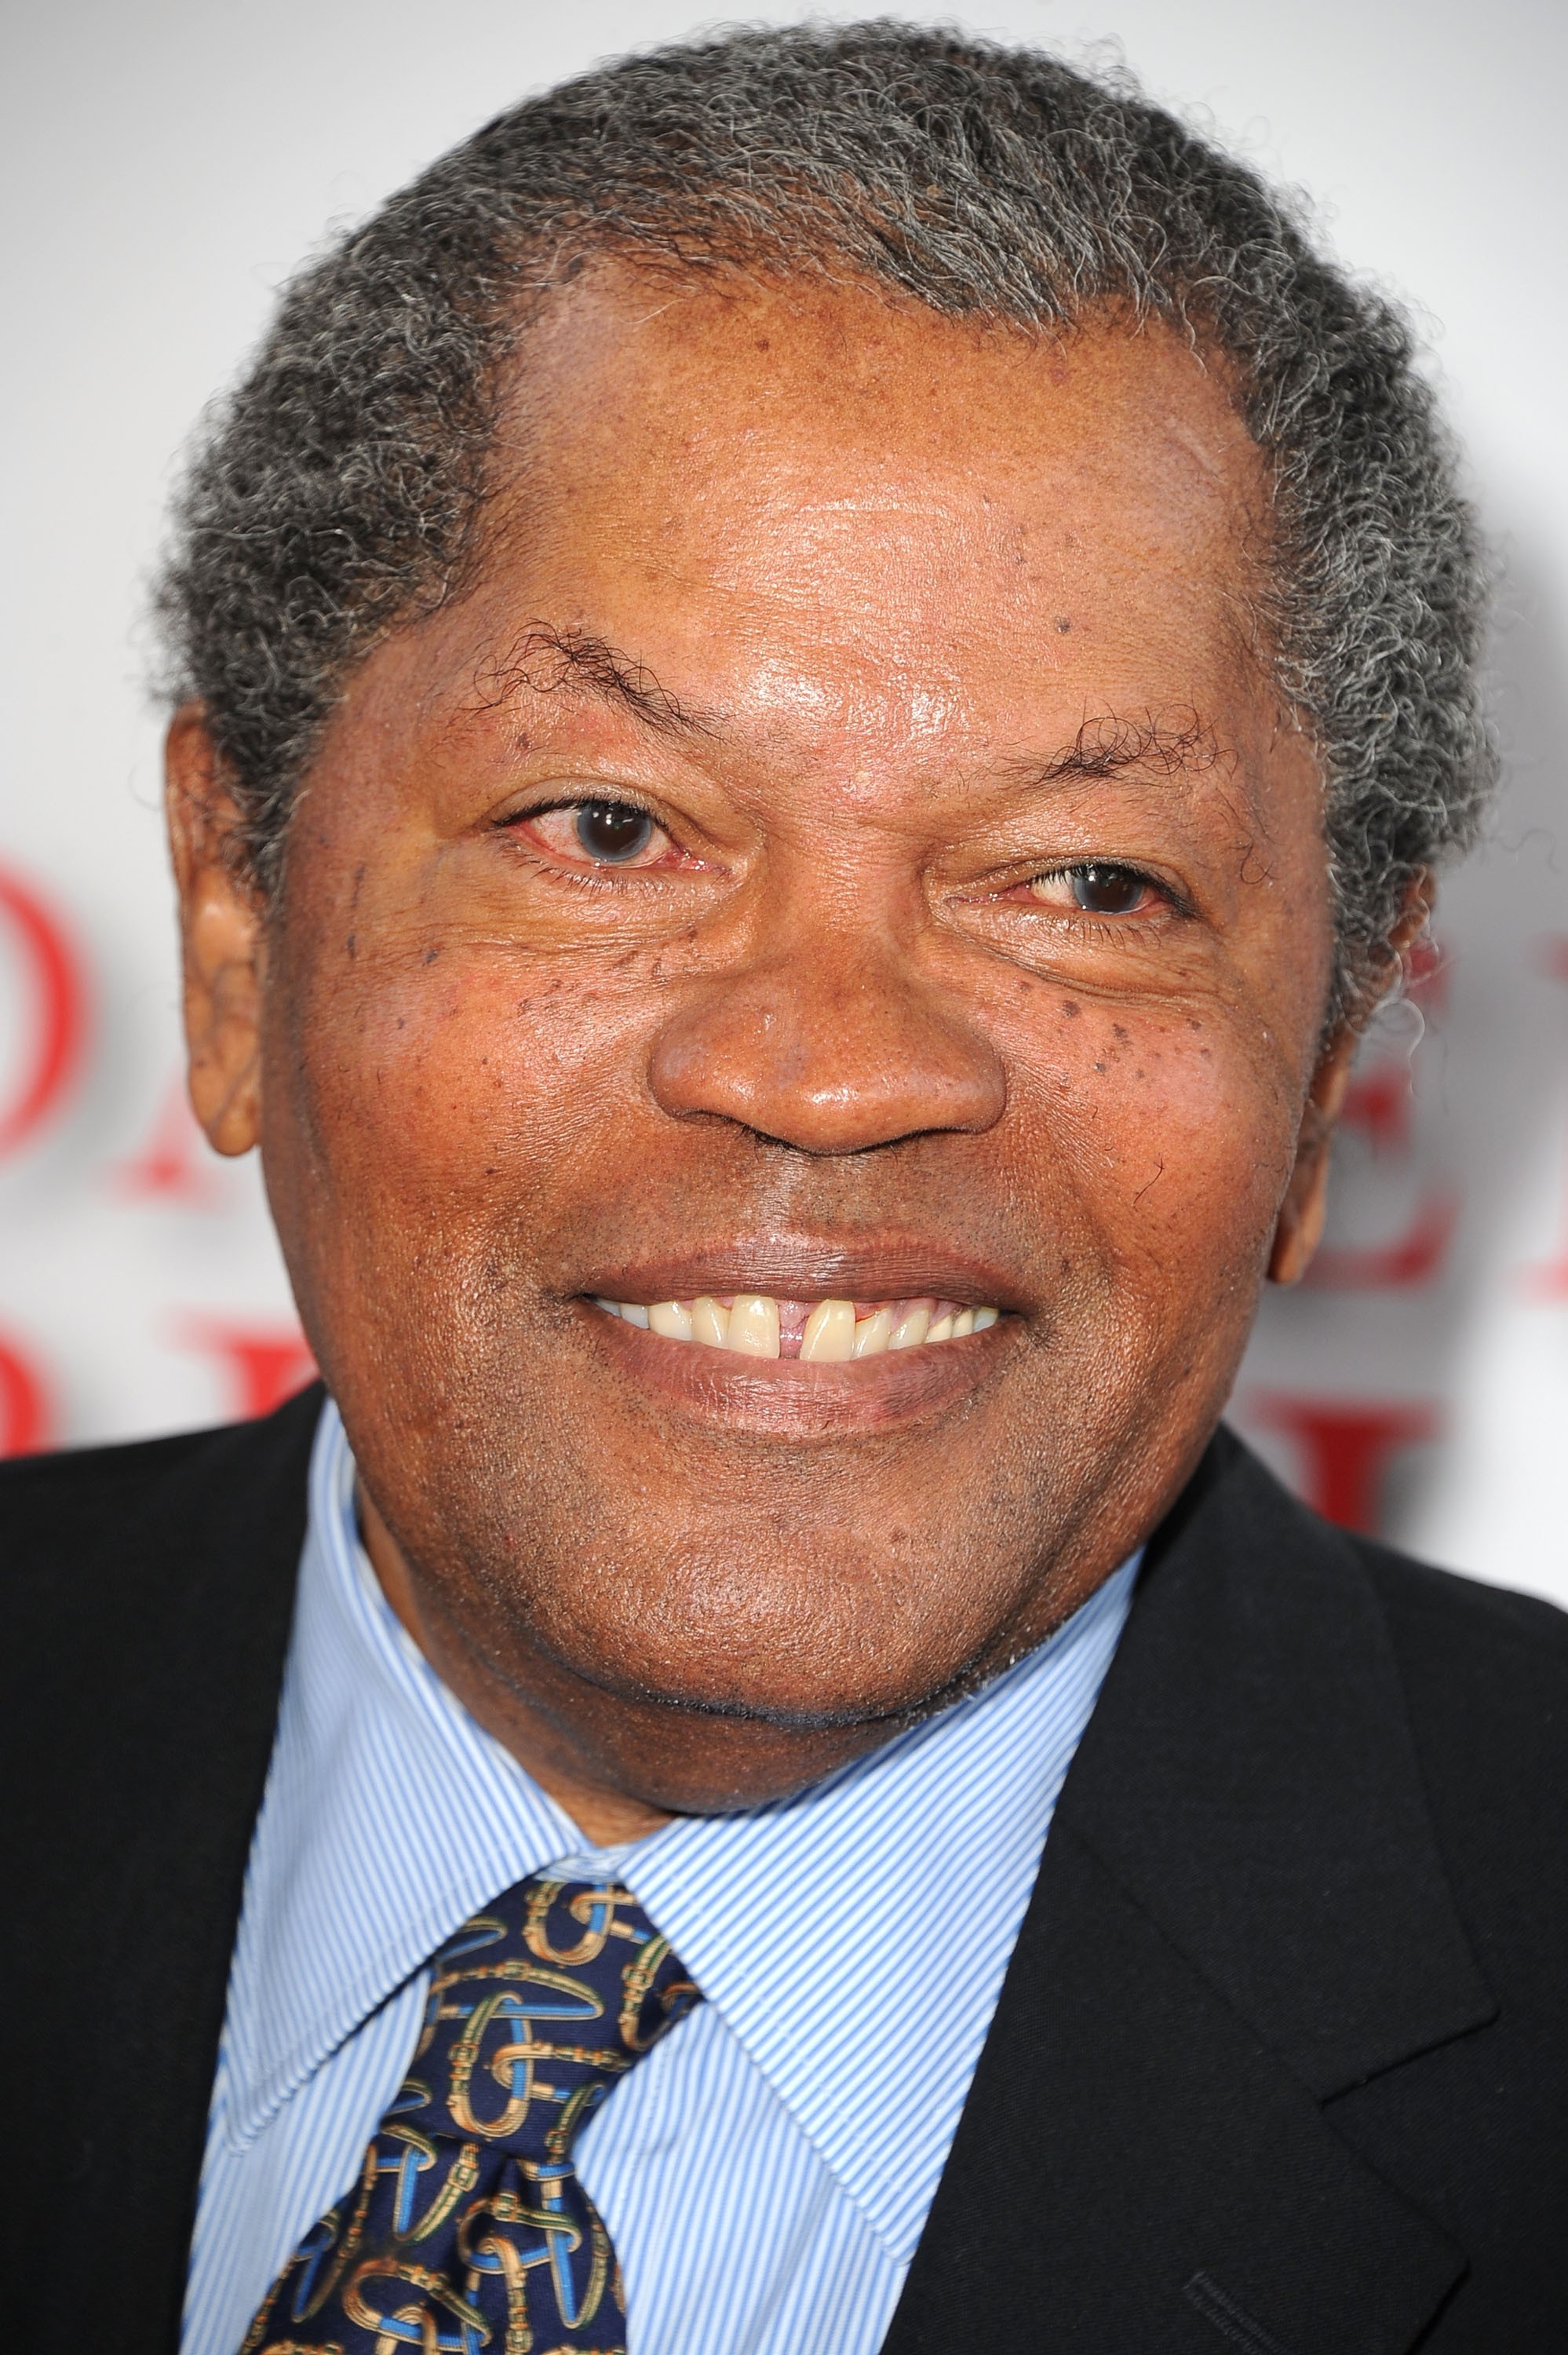 LOS ANGELES, CA - AUGUST 12:  Clarence Williams III arrives at the "Lee Daniels' The Butler" - Los Angeles Premiere at Regal Cinemas L.A. Live on August 12, 2013 in Los Angeles, California.  (Photo by Steve Granitz/WireImage) (Foto: WireImage)